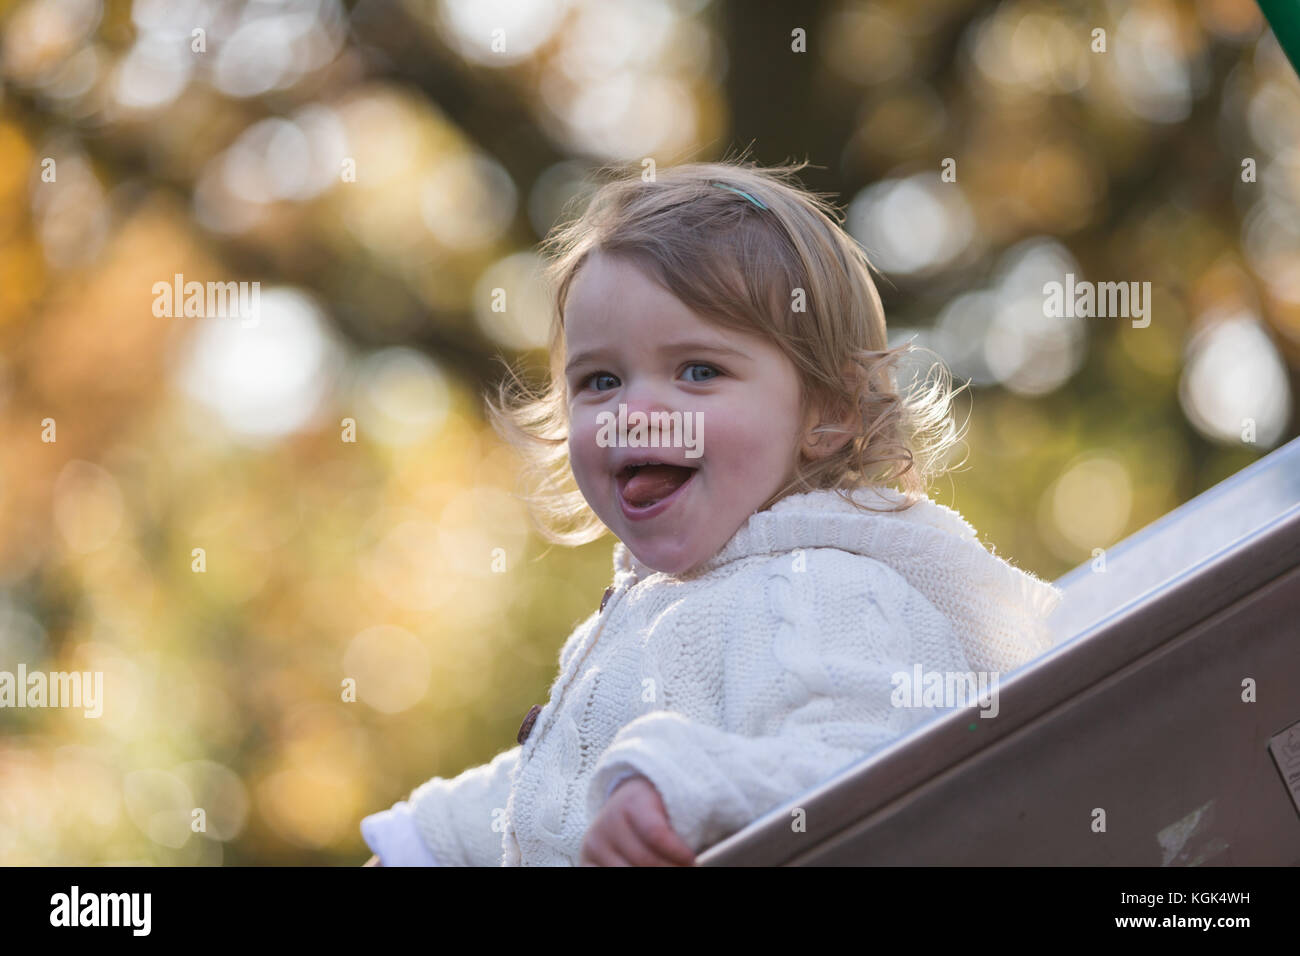 18 month old child playing on a slide in a park, UK Stock Photo